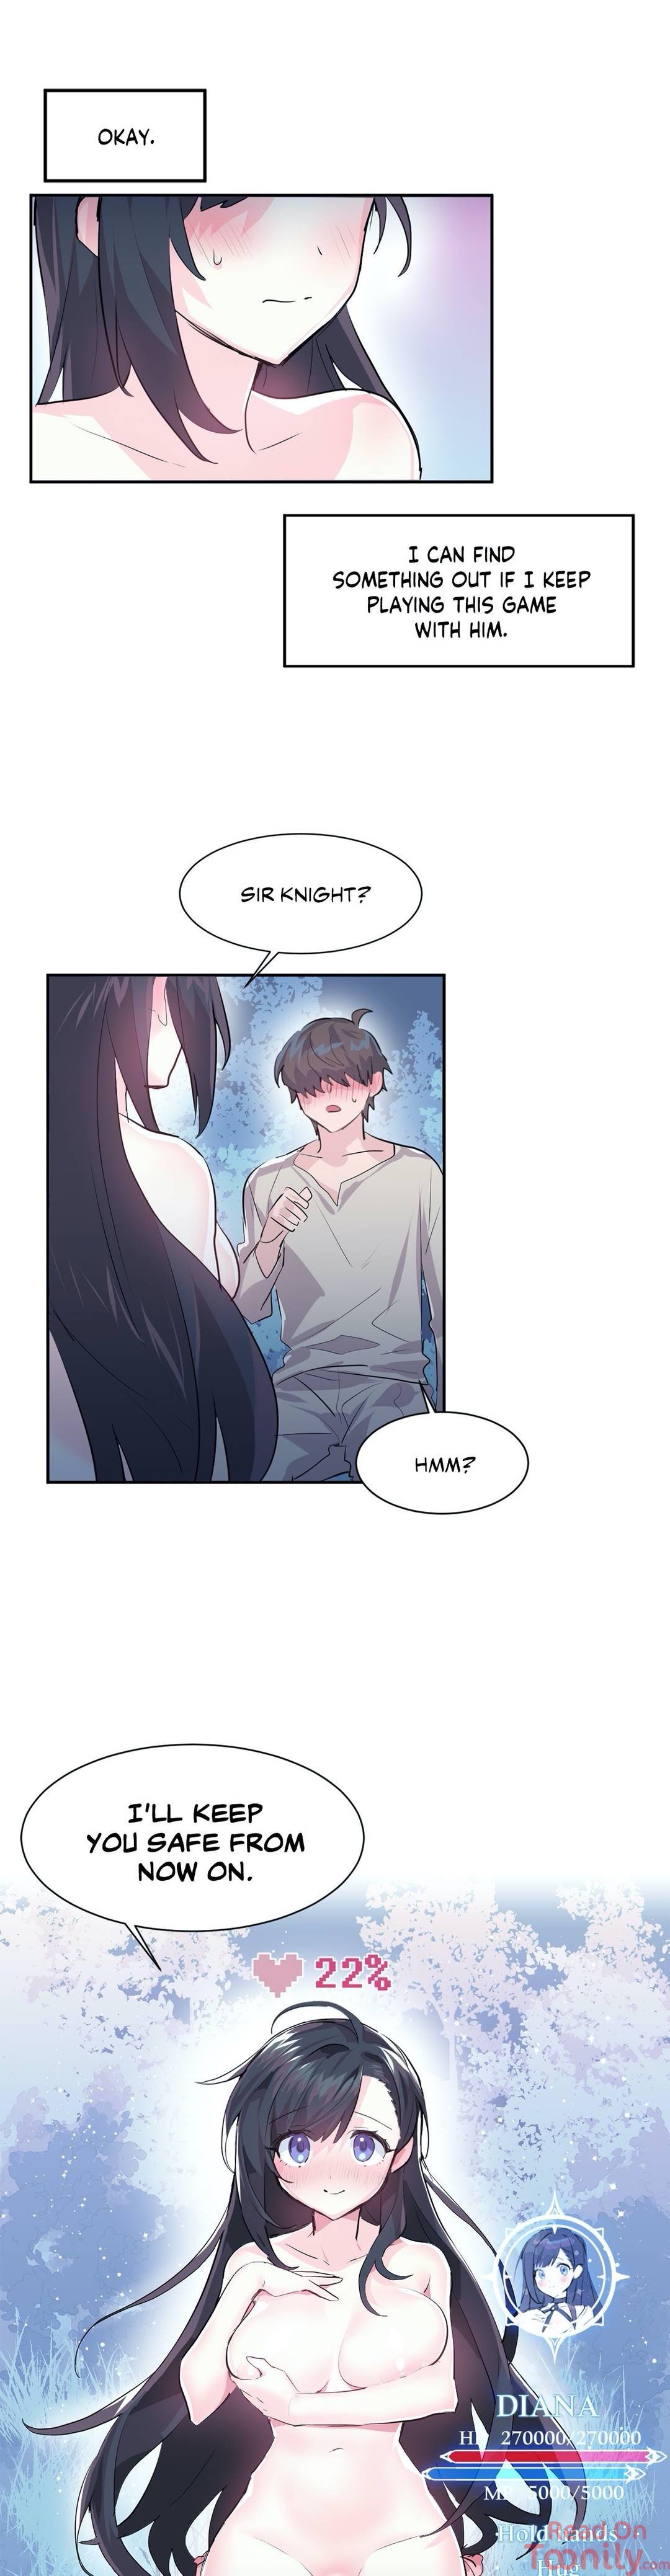 log-in-to-lust-a-land-chap-3-24